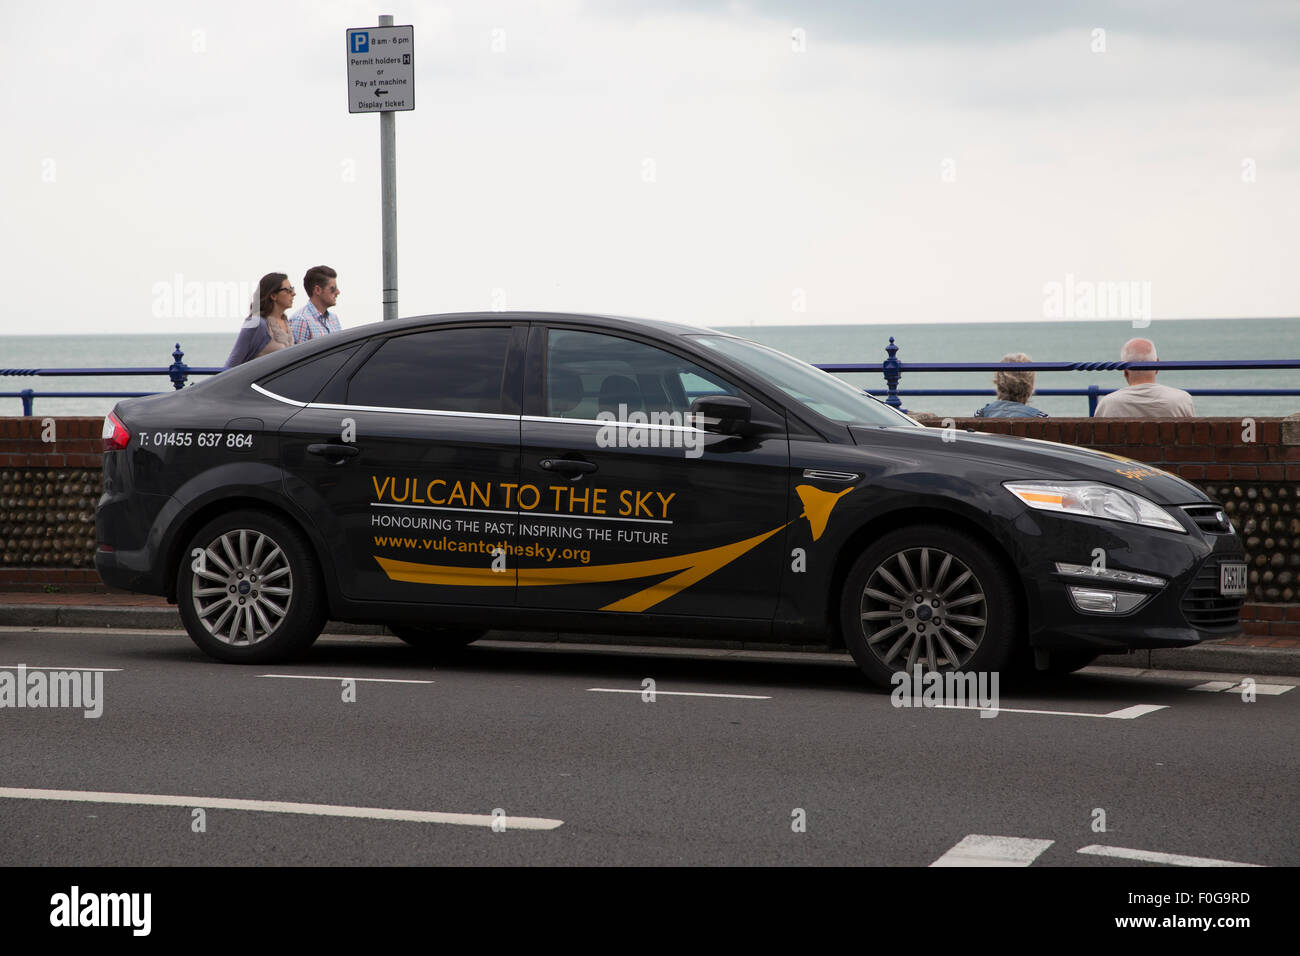 Eastbourne, UK,15th August 2015, Vulcan to the sky advert on a car parked at Eastbourne's International Airshow 201 Credit: Keith Larby/Alamy Live News Stock Photo